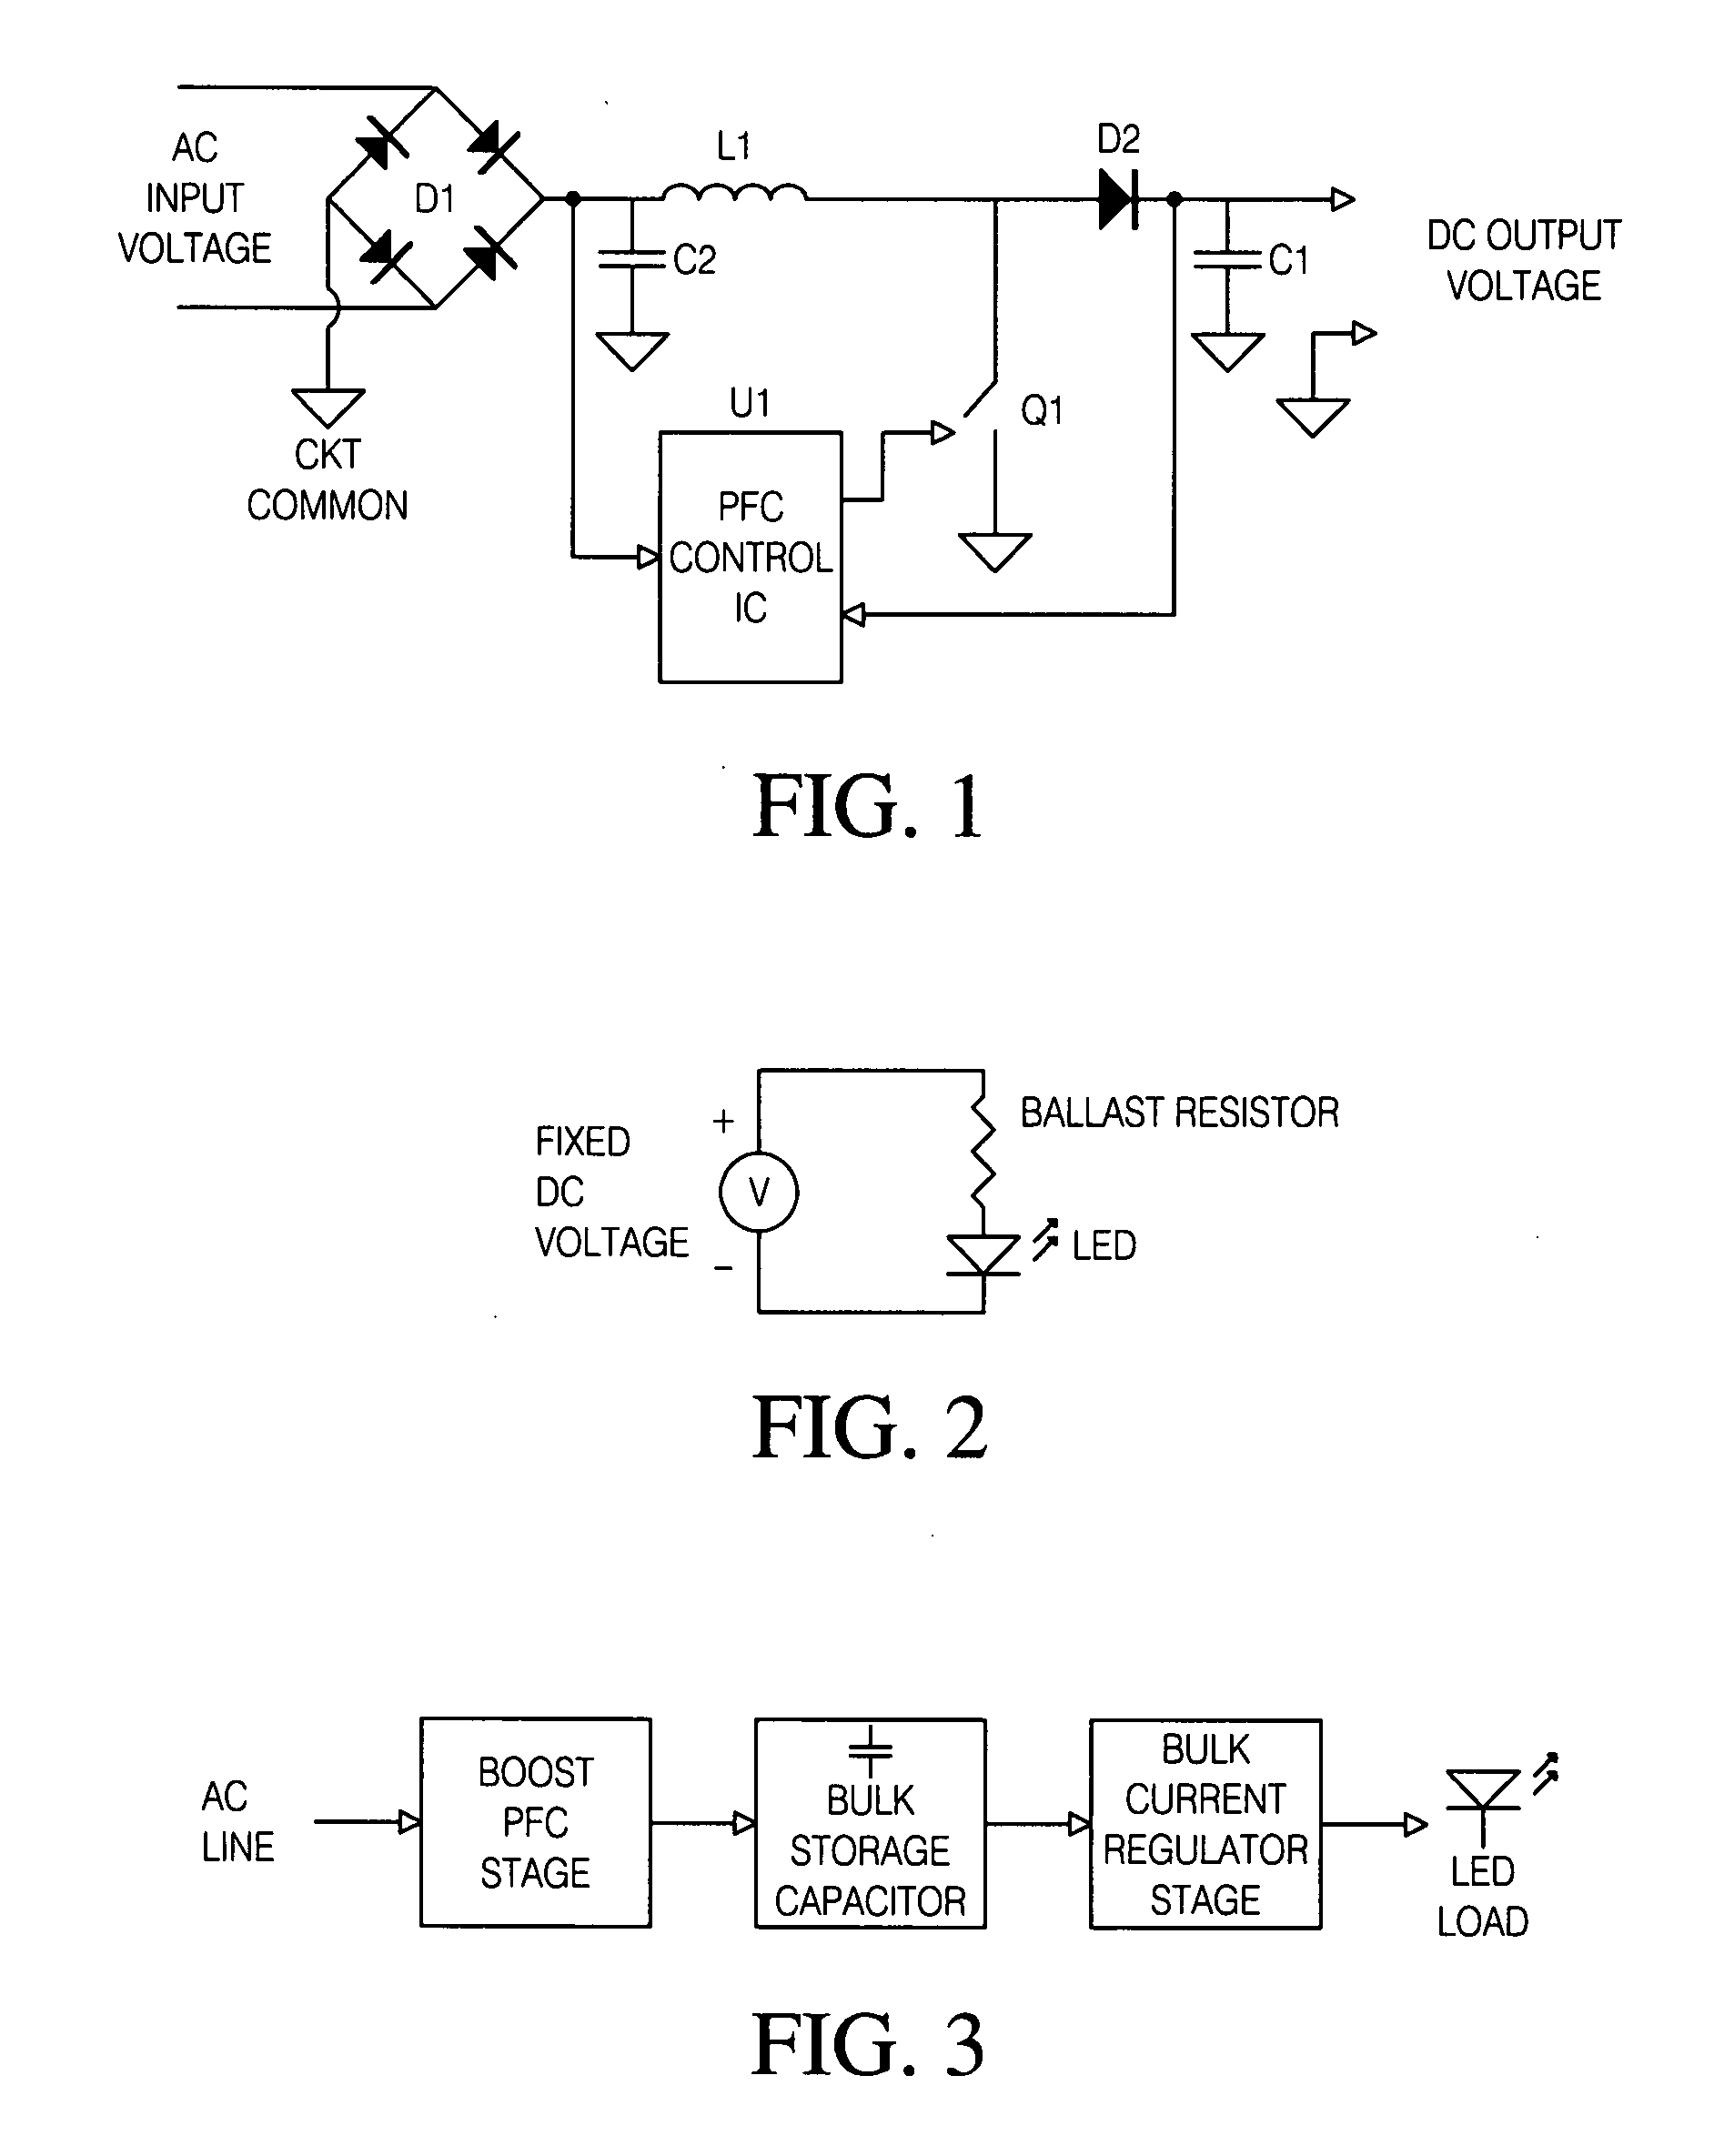 LED power supply with options for dimming